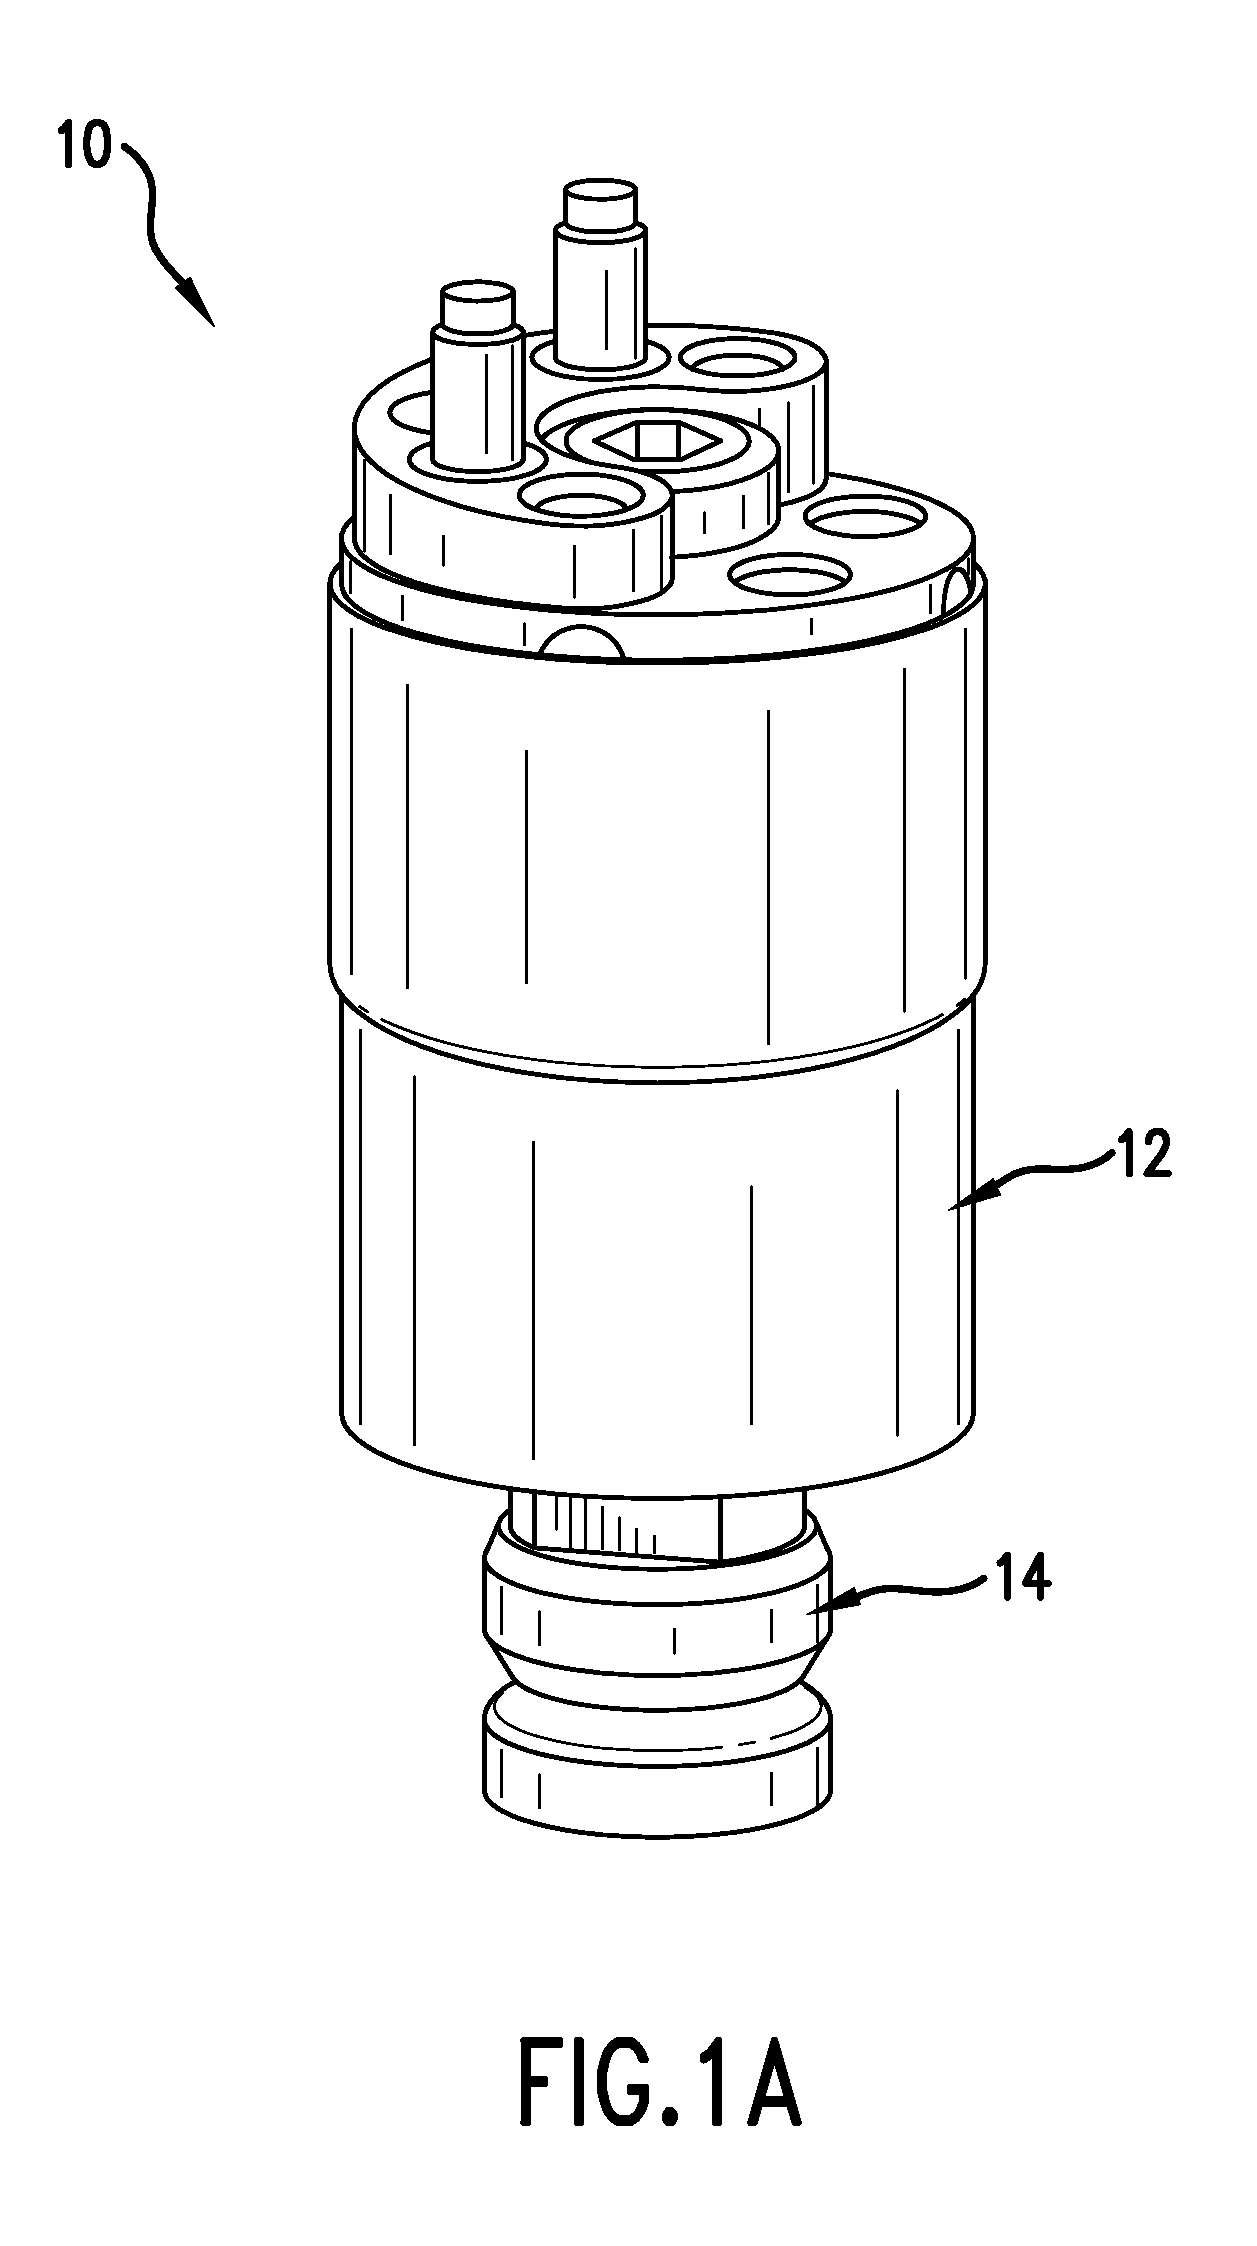 Solenoid actuated flow control valve including stator core plated with non-ferrous material